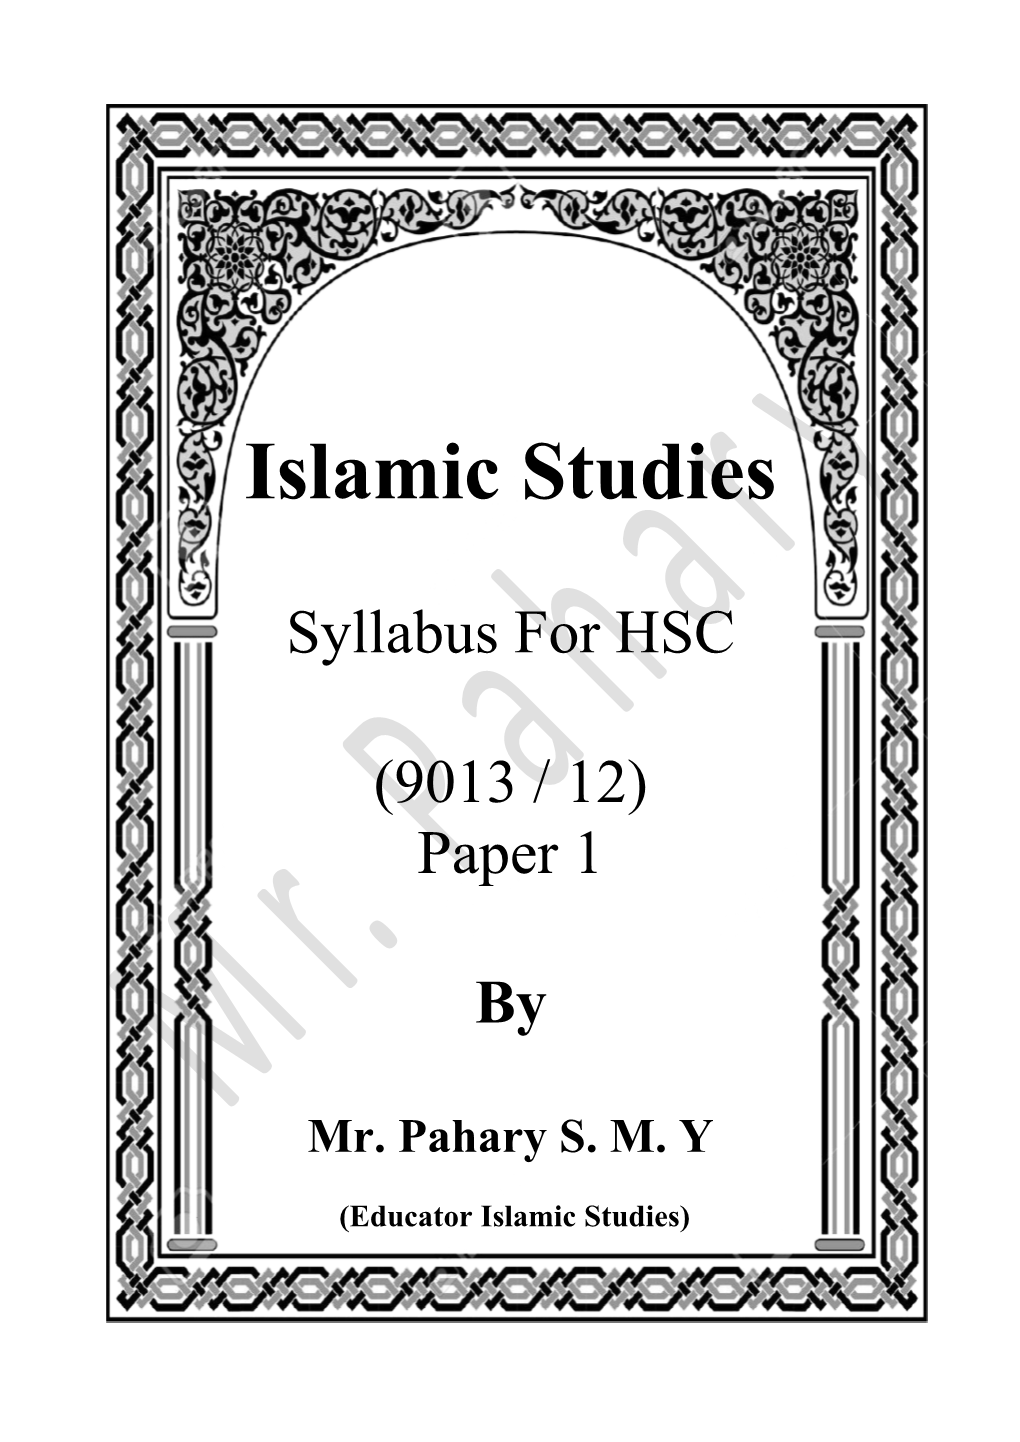 Syllabus for HSC (9013 / 12) Paper 1 By